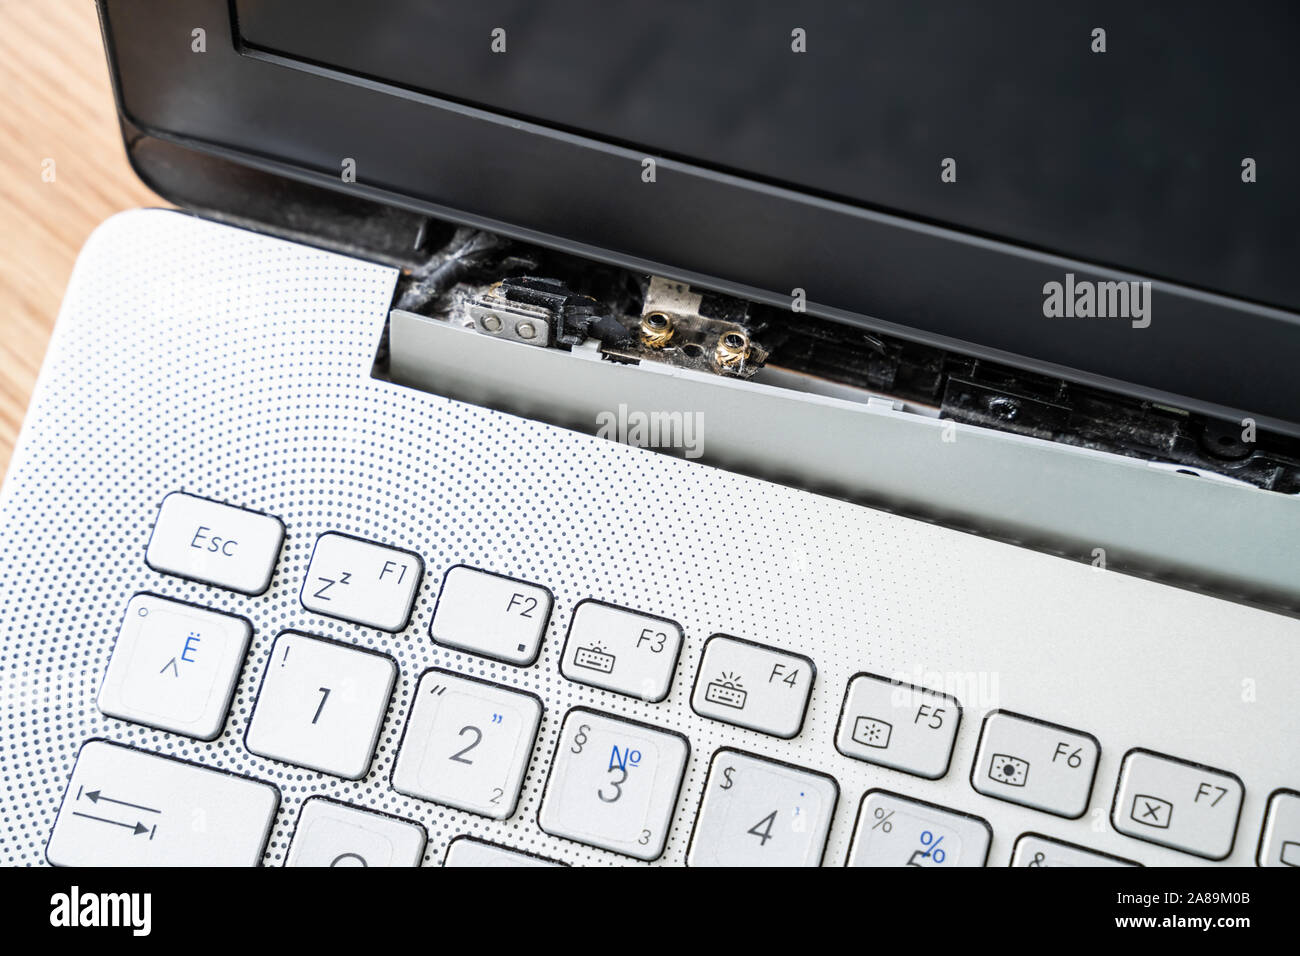 Damaged Laptop Computer With Broken Screen Attachment Stock Photo